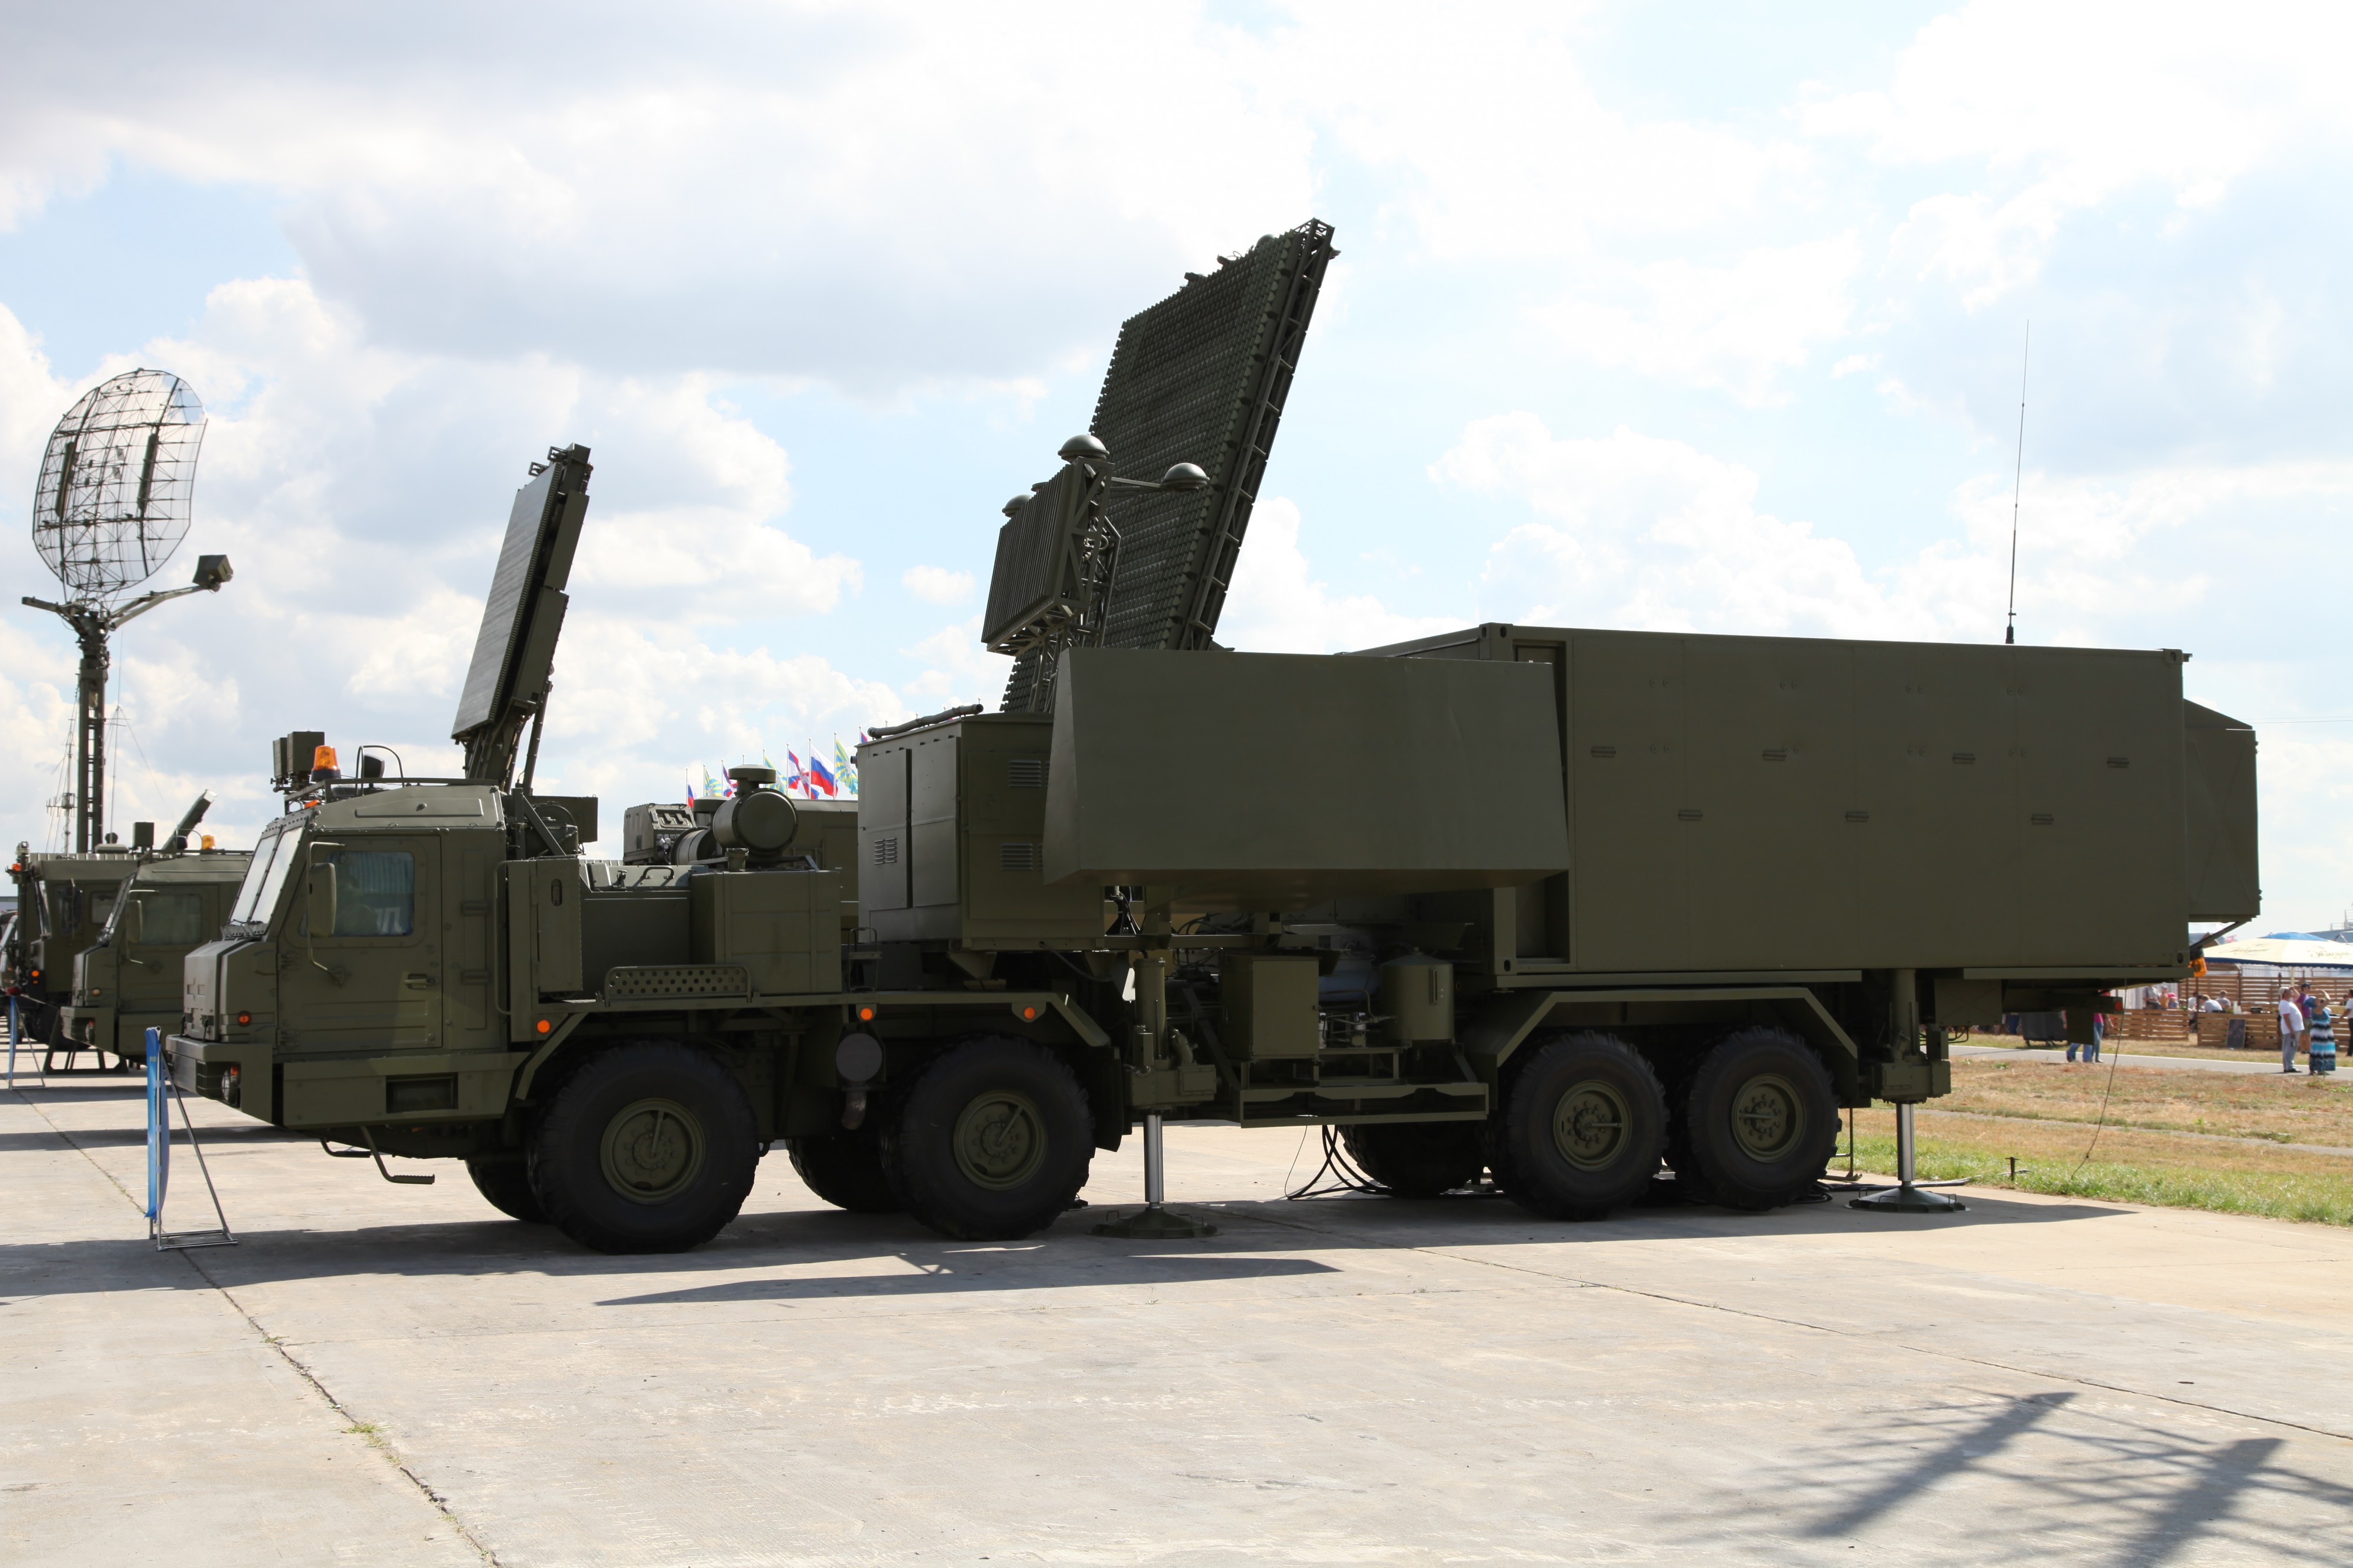 55Zh6ME mobile radar, Celebration of the 100th anniversary of Russian Air Force